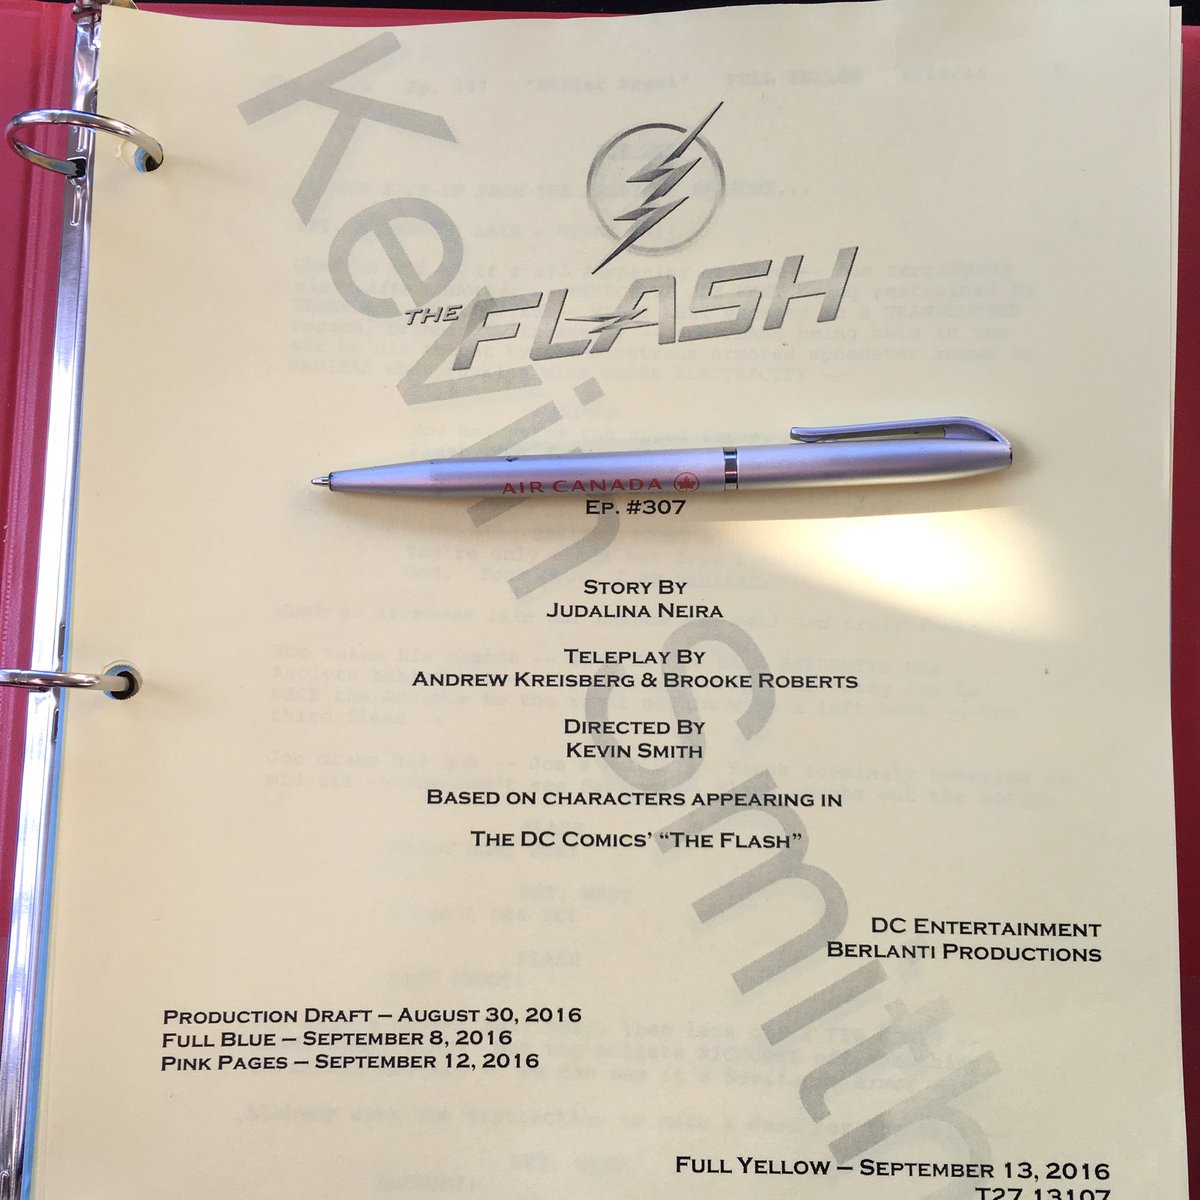 I start shooting my second episode of @CW_TheFlash today! Big thanks to @AJKreisberg & @GBerlanti for another run! https://t.co/2leDmdzVju